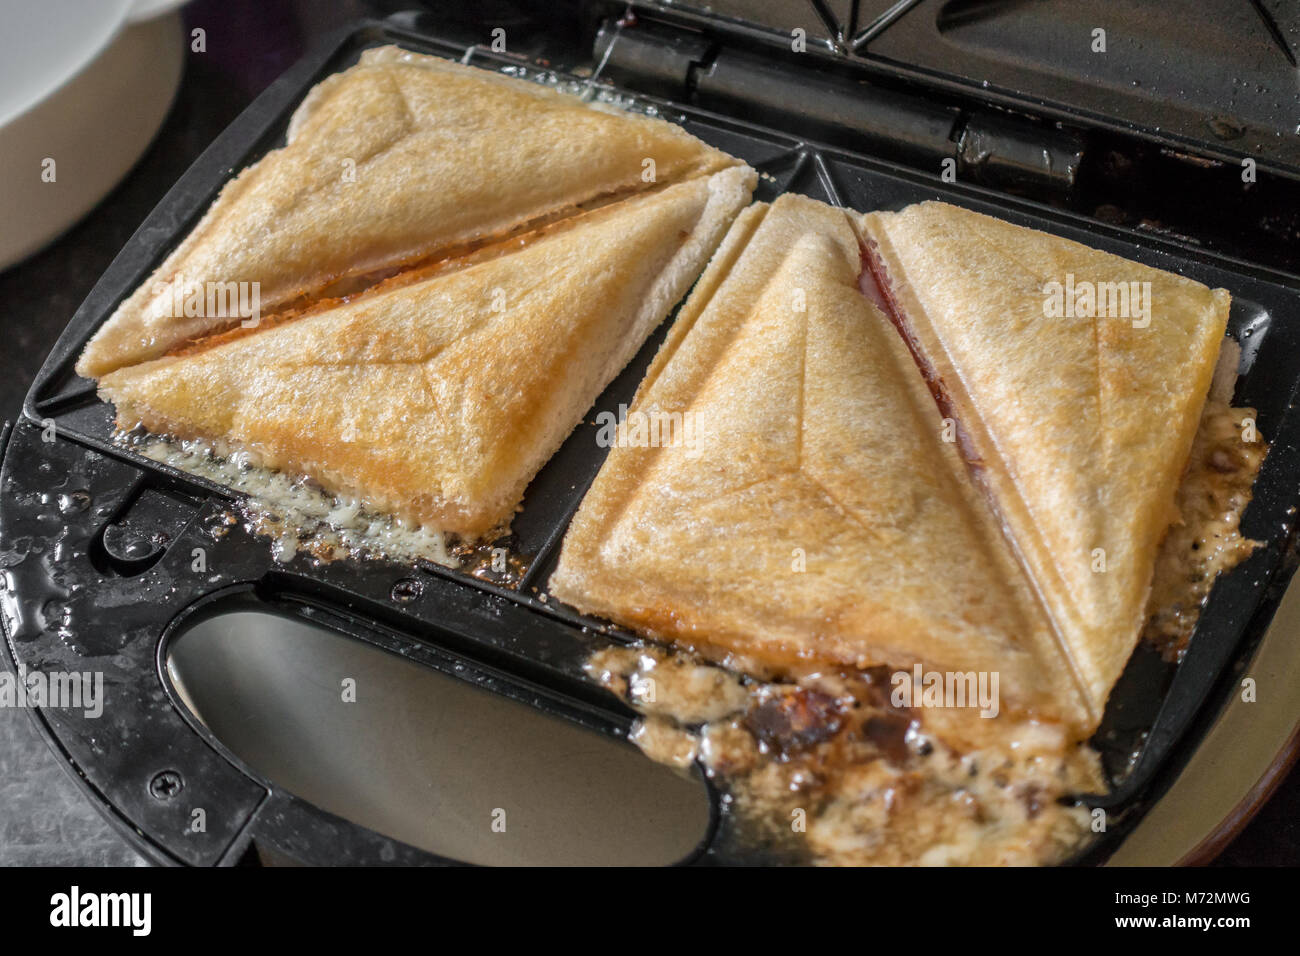 160+ Toasted Sandwich Maker Stock Photos, Pictures & Royalty-Free